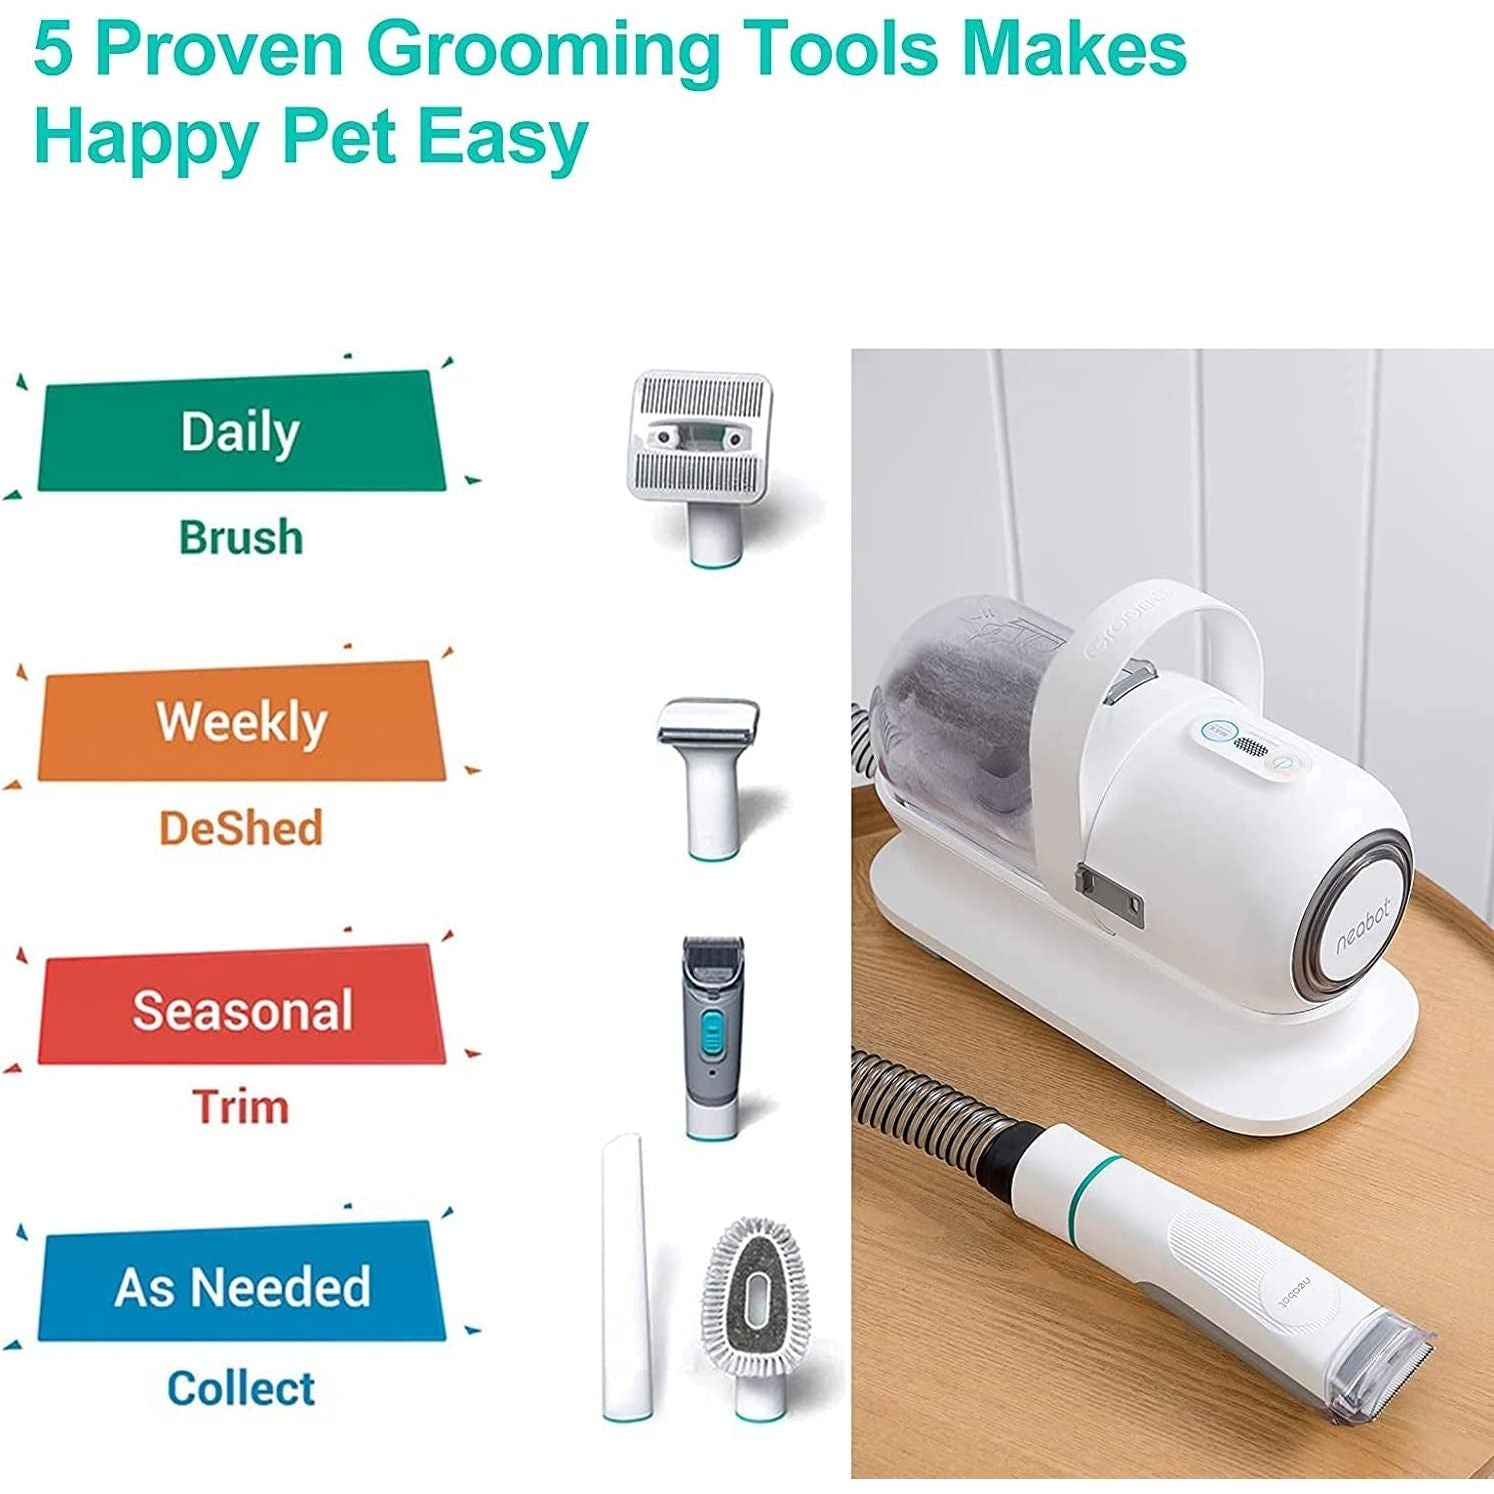 Professional Grooming Clippers with 5 Proven Grooming Tools Pet Grooming Kit & Vacuum Suction 99% Pet Hair